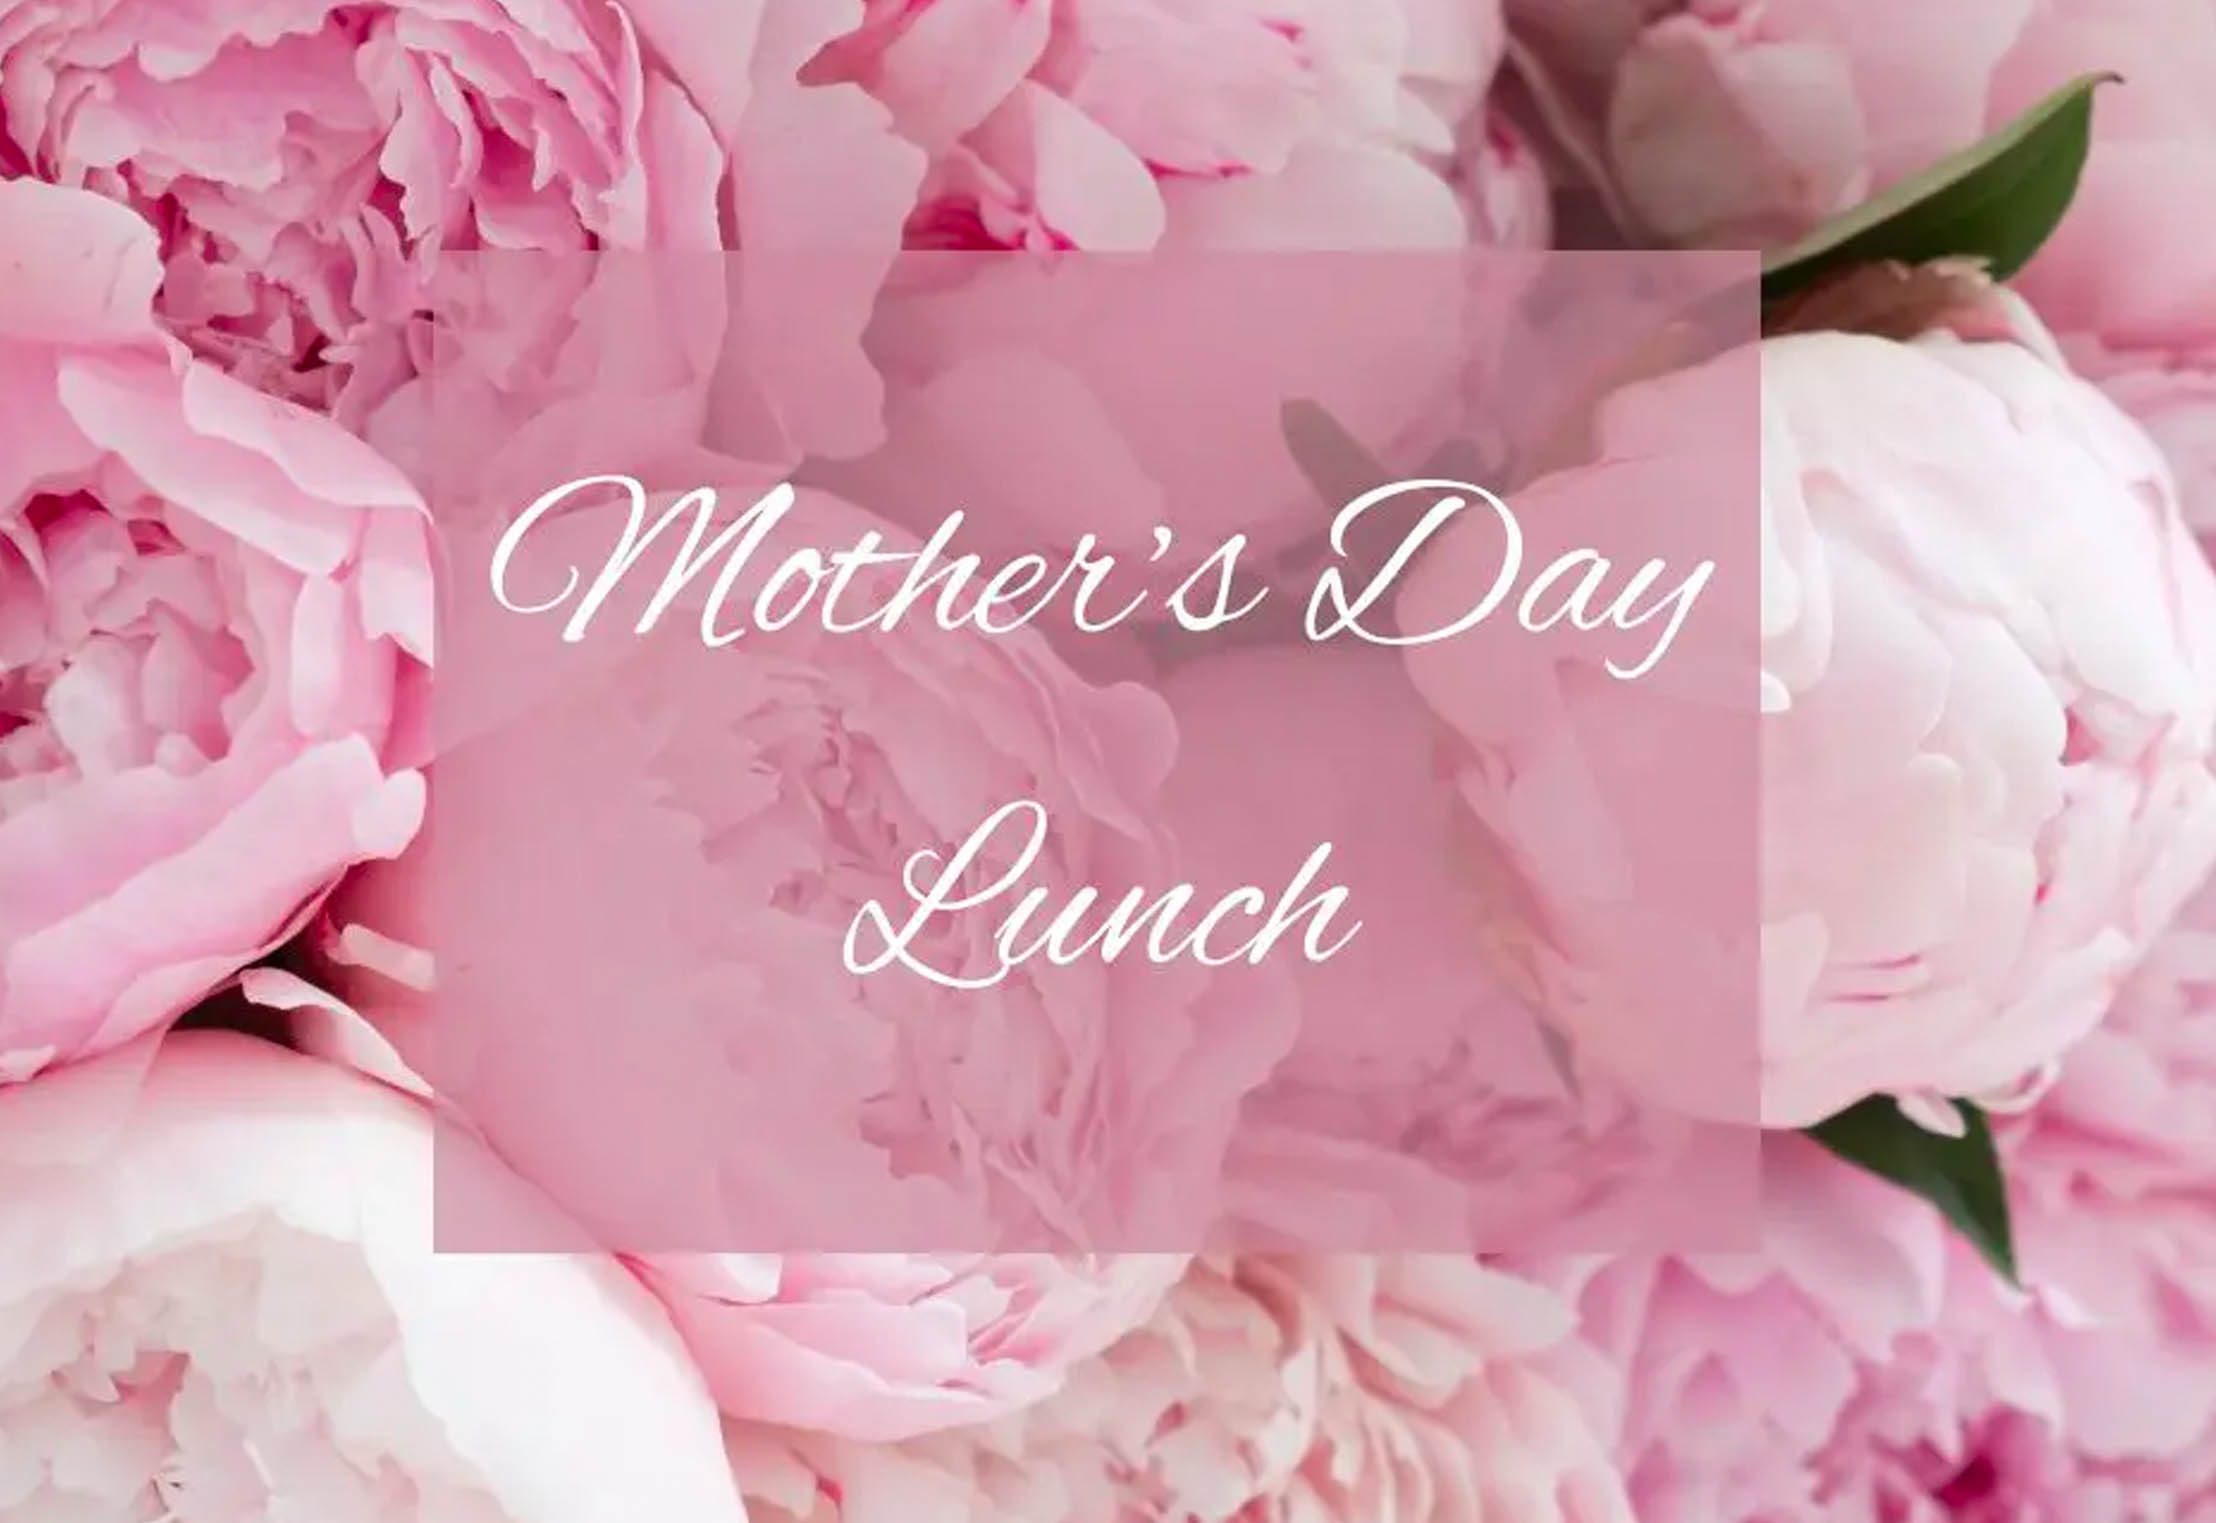 Mothers Day at the Wrightington Hotel Health Club & Spa